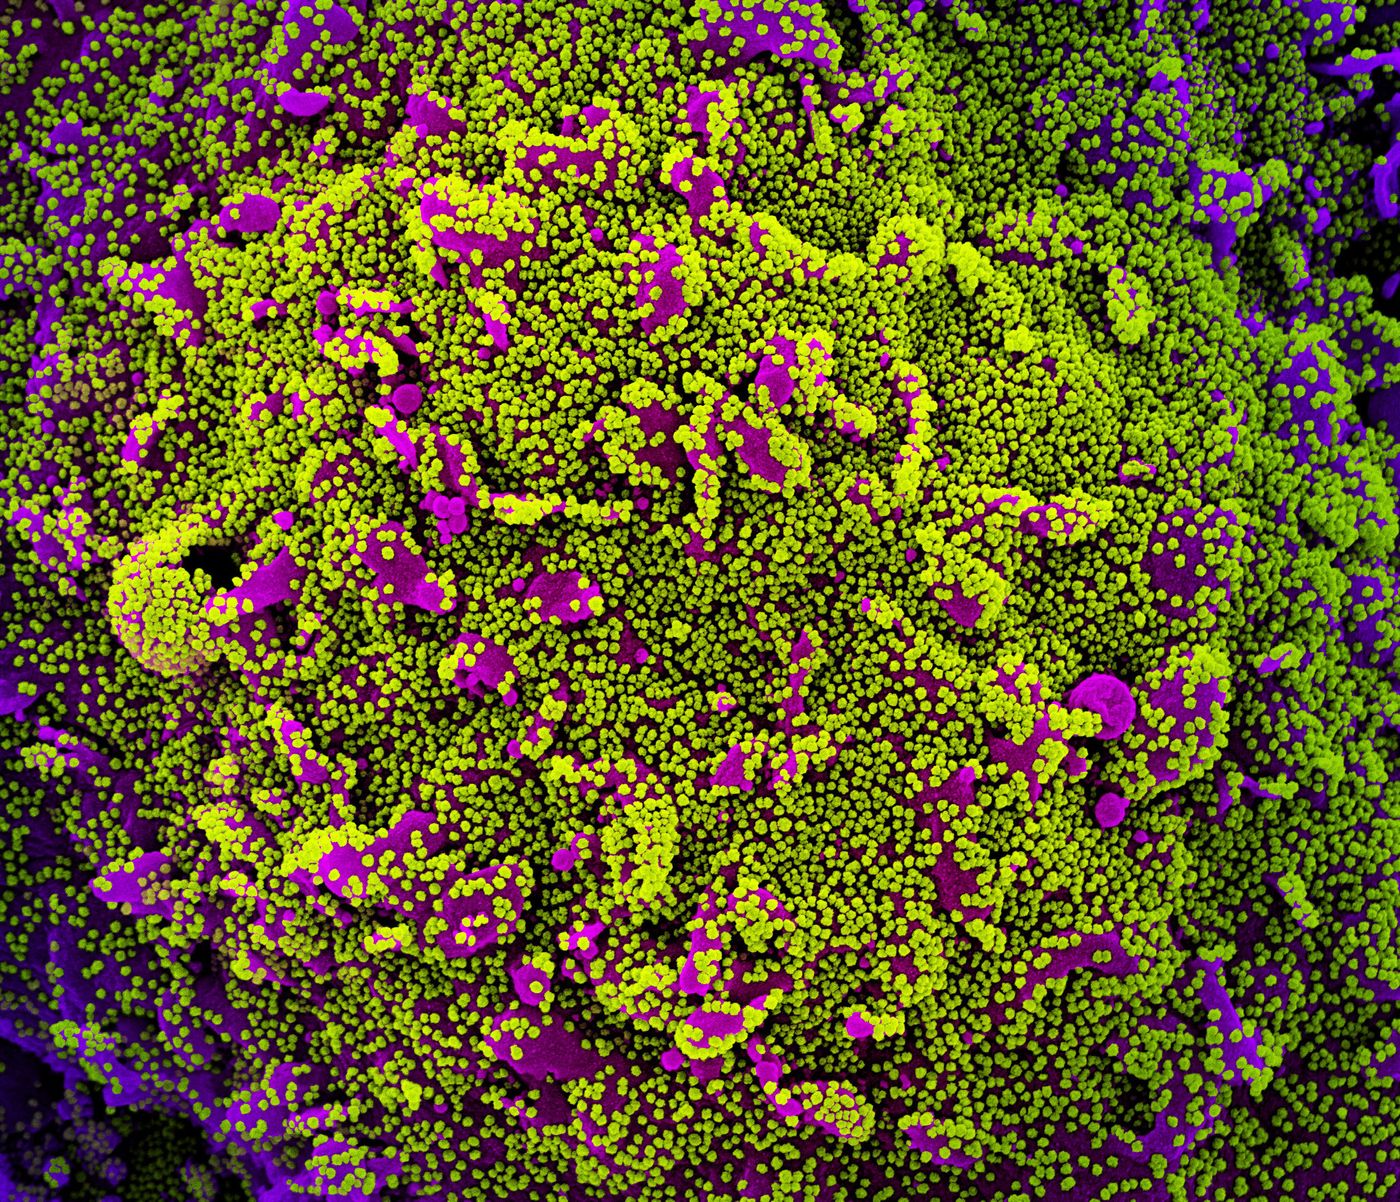 Colorized scanning electron micrograph of a cell (purple) heavily infected with SARS-CoV-2 virus particles, isolated from a patient sample. Image captured at the NIAID Integrated Research Facility (IRF) in Fort Detrick, Maryland. Credit: NIAID